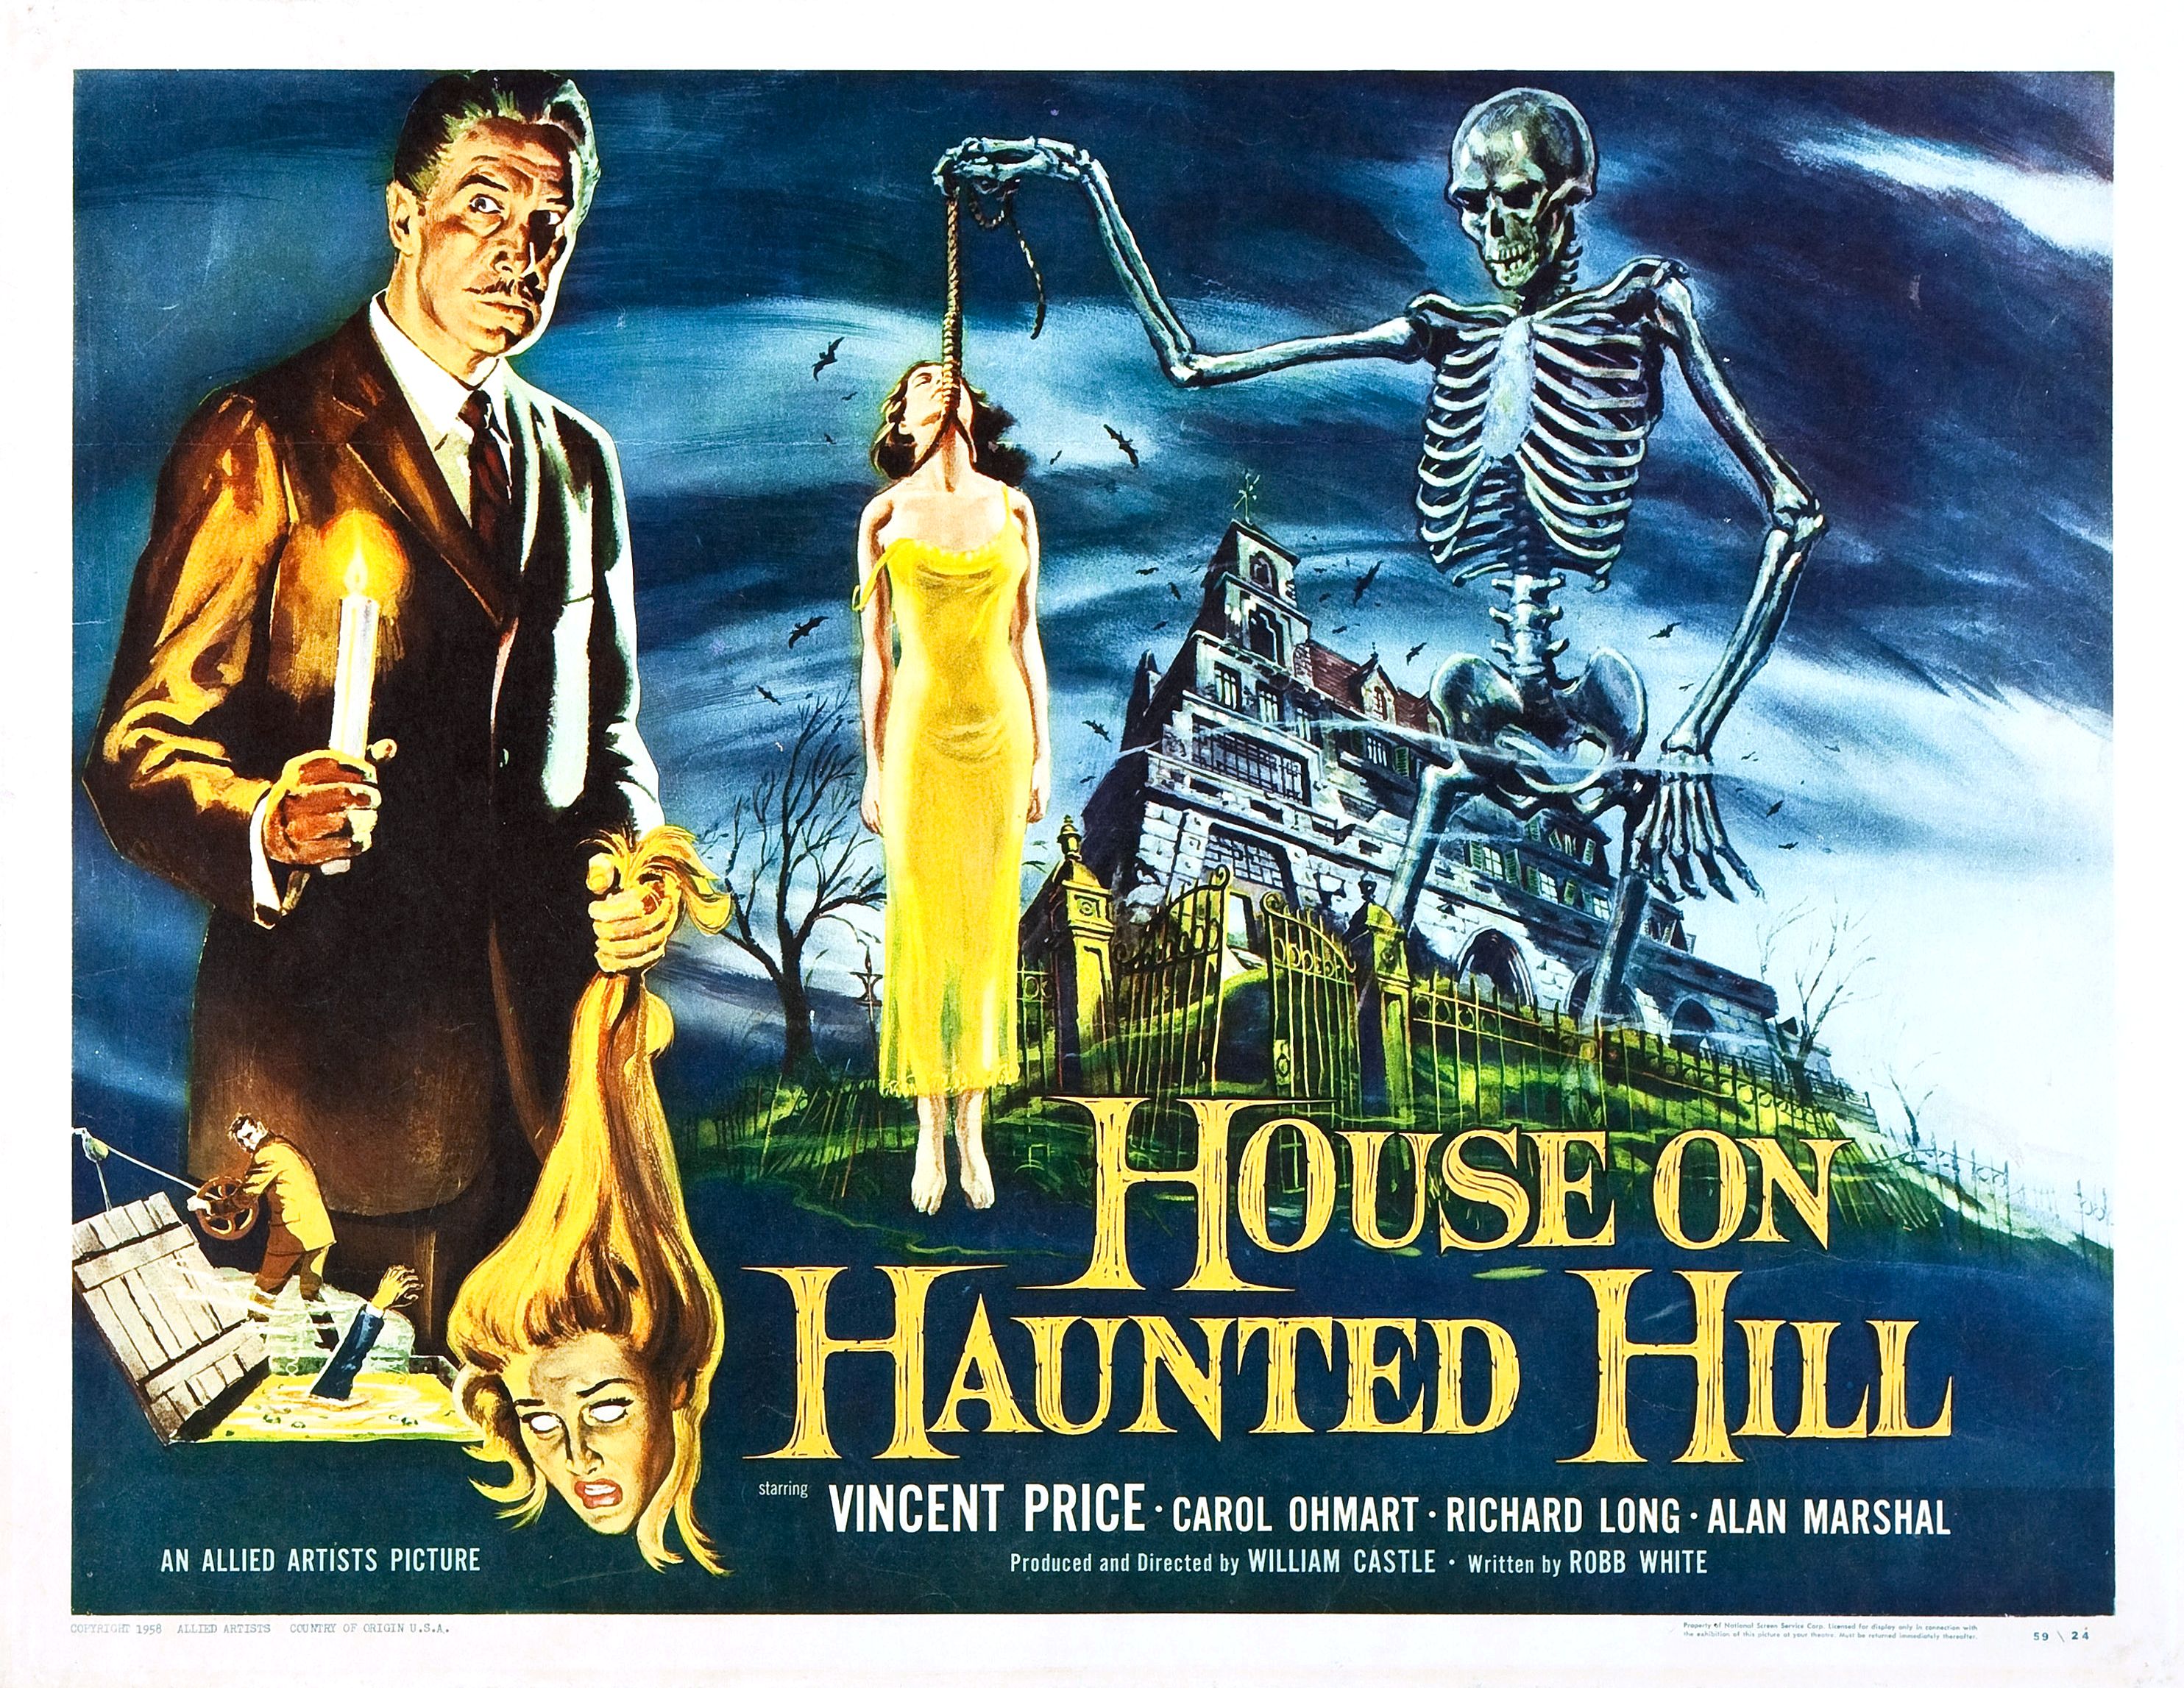 House on Haunted Hill (1959): More Than Just a Gimmick